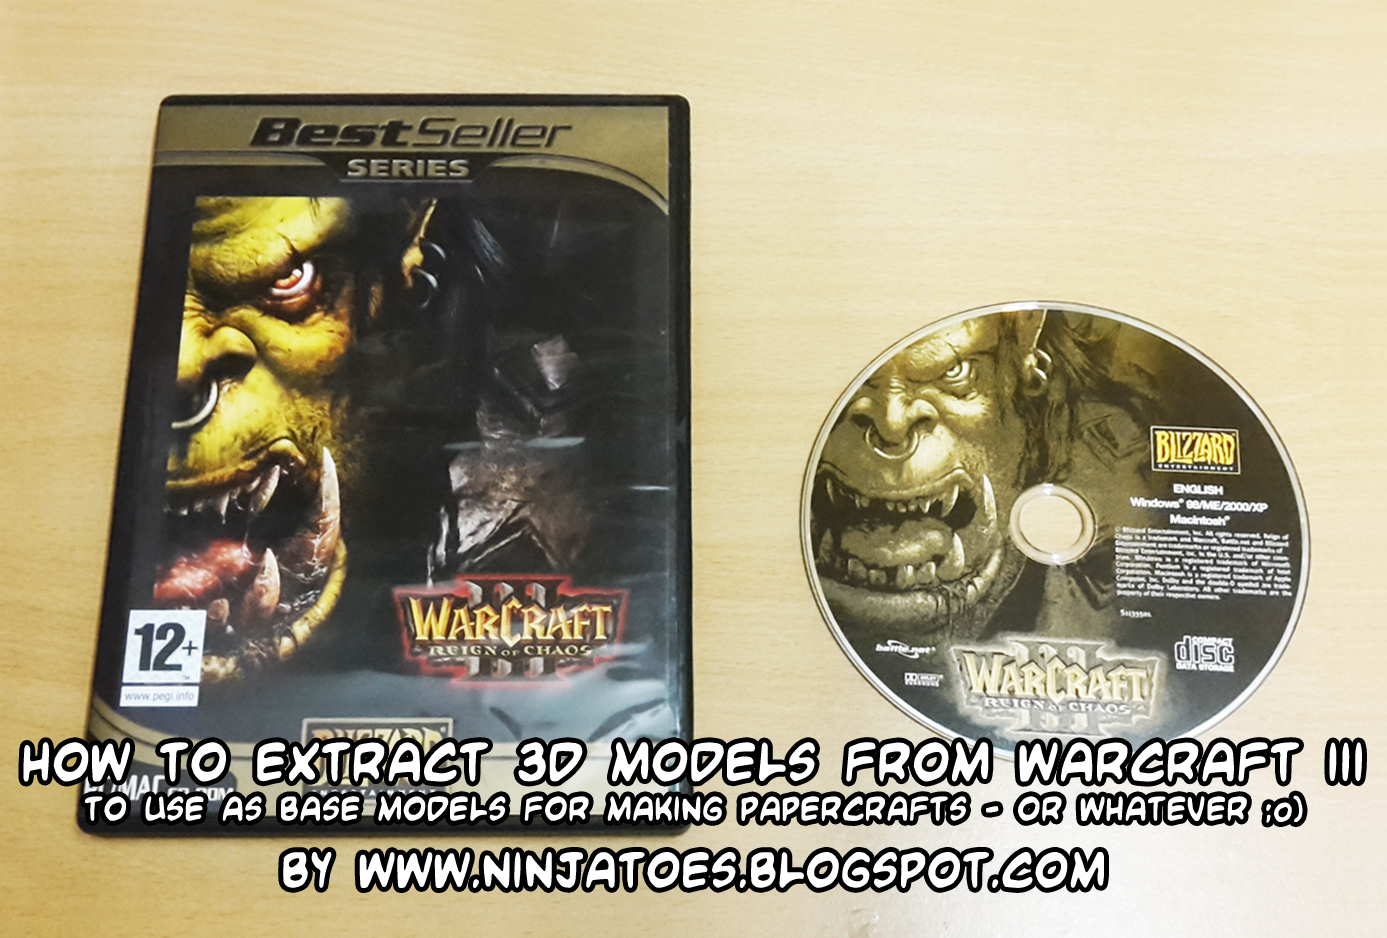 Ninjatoes' papercraft weblog: 3D models from Warcraft III base models for papercrafts! (well, for any occasion of course ;o)